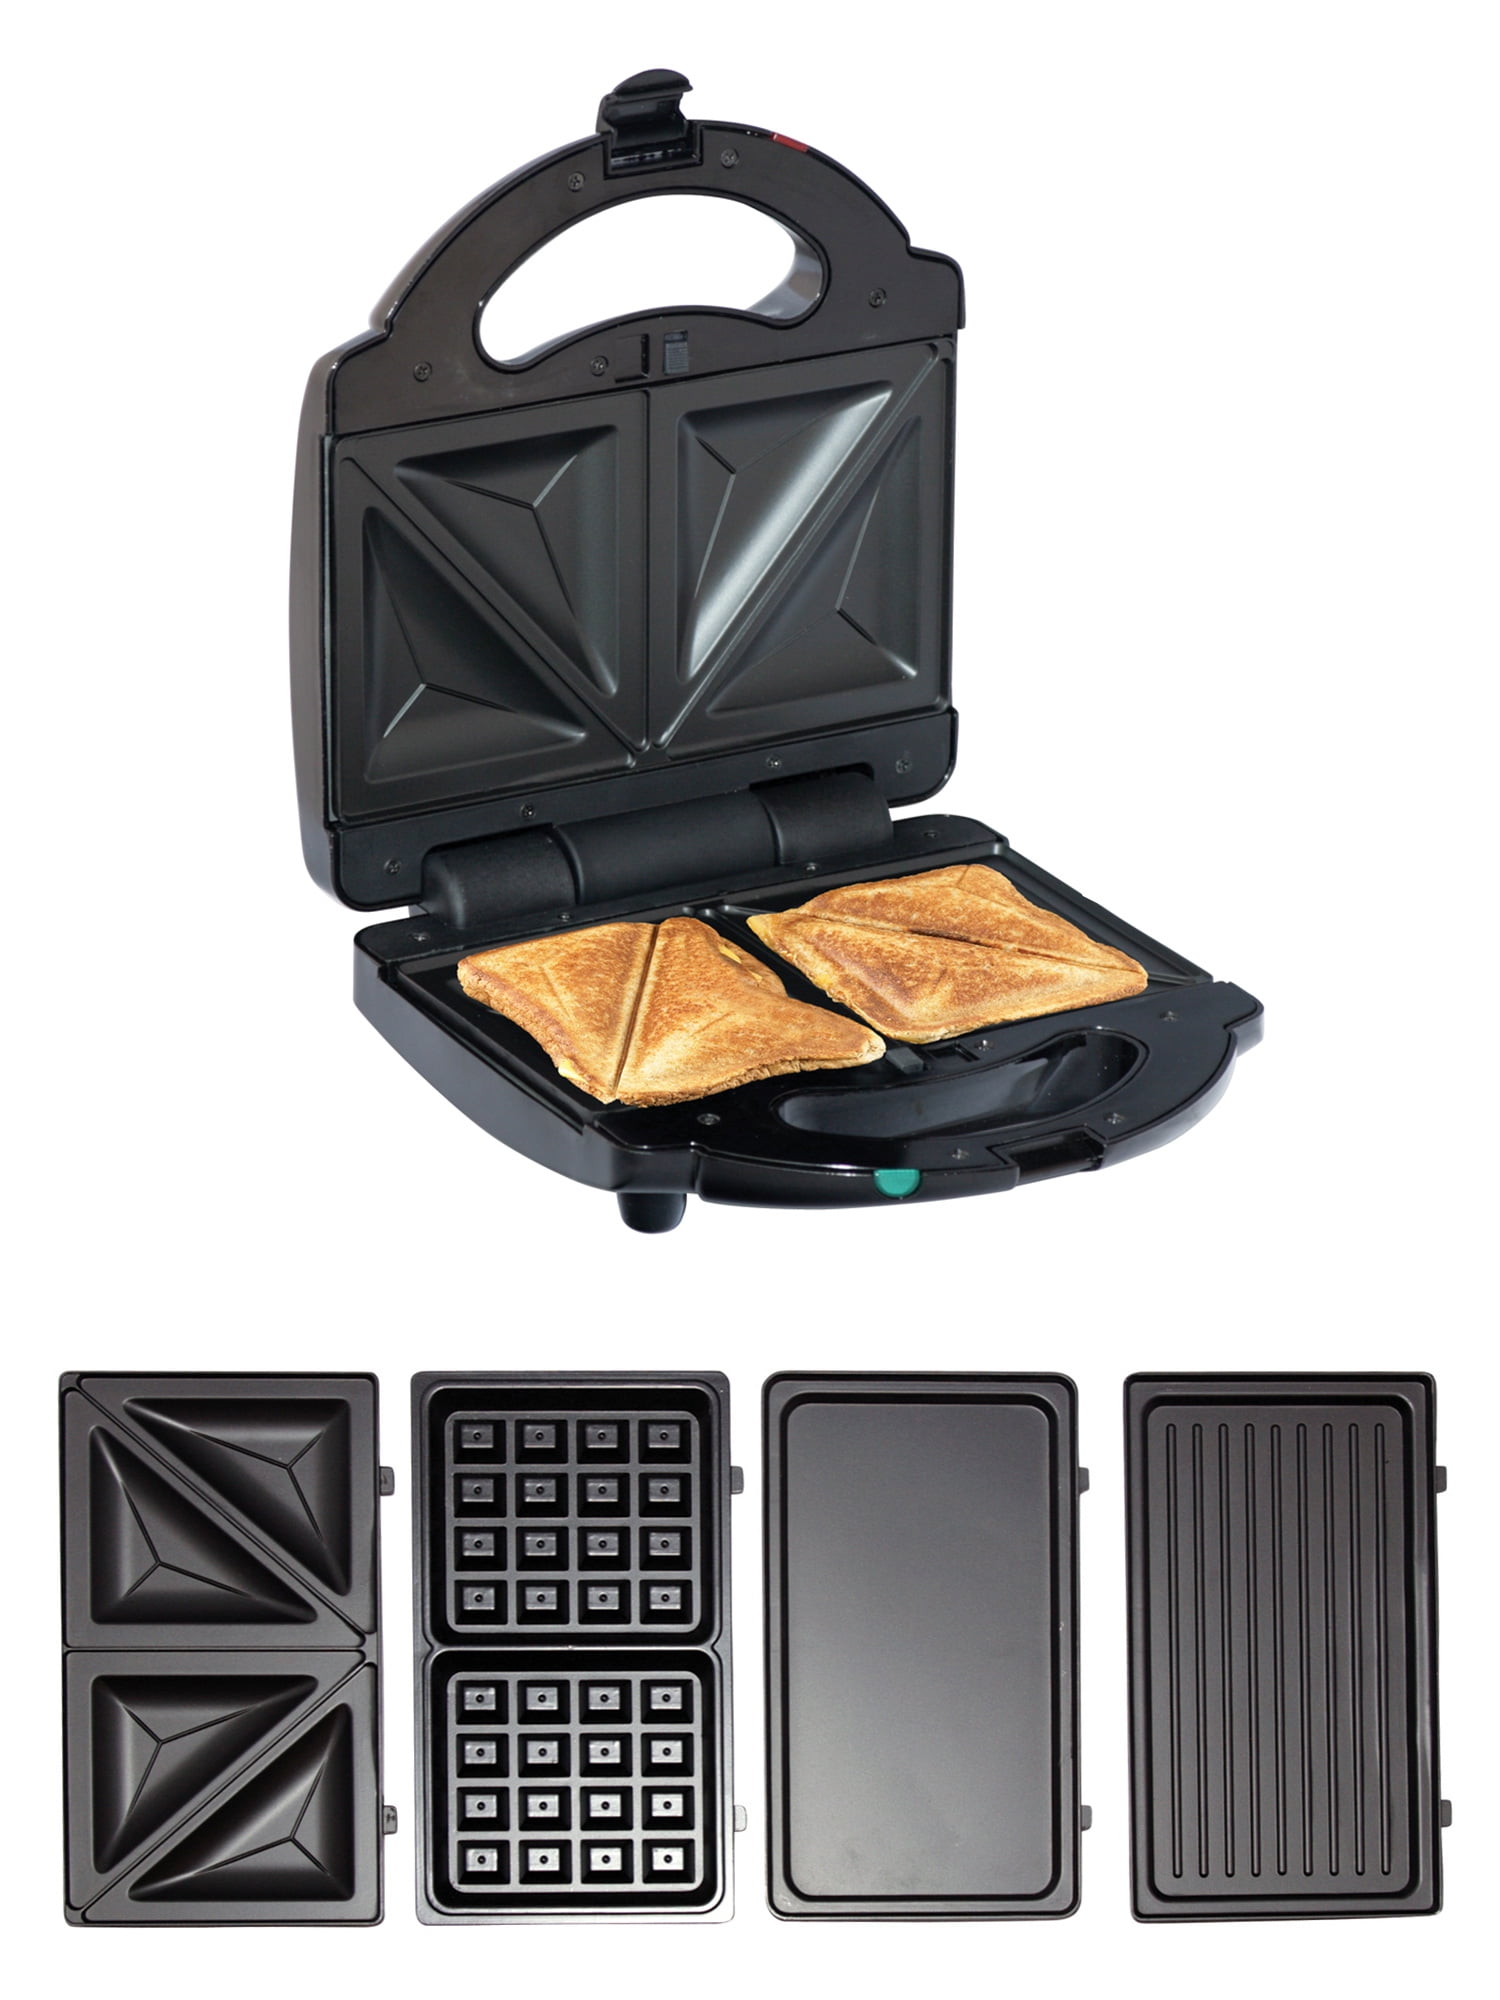 Black Renewed George Foreman GR340FB 4-Serving Classic Plate Electric Indoor Grill and Panini Press